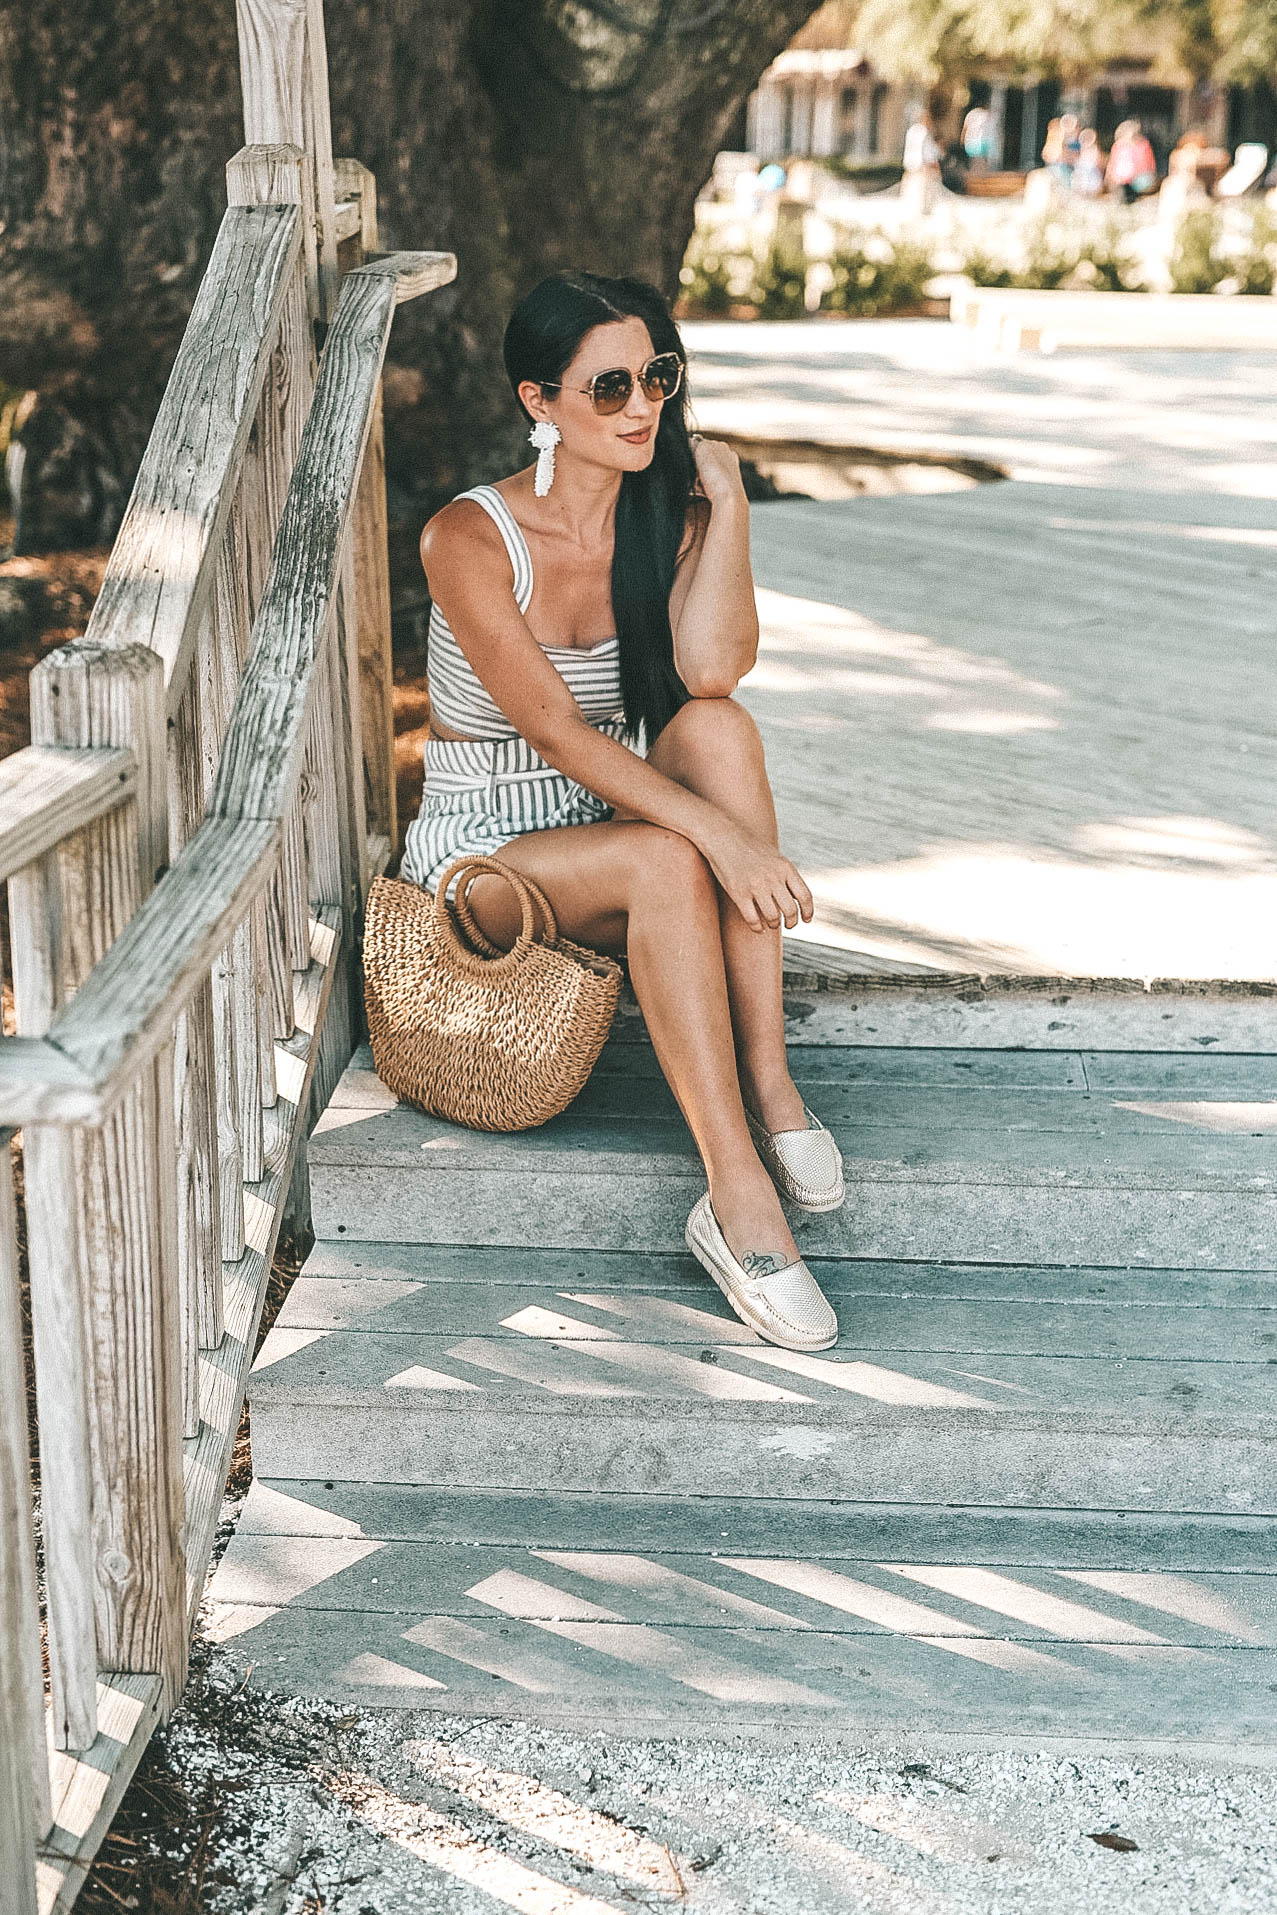 DTKAustin shares tips on what to do at the Harbour Town Lighthouse while on Hilton Head Island in South Carolina. || Dressed to Kill #HHI #hiltonhead #harbourtownlighthouse #sctravel #scbeaches #dtkaustin - {Exploring the Harbour Town Lighthouse + Giveaway} featured by popular Austin travel blogger, Dressed to Kill